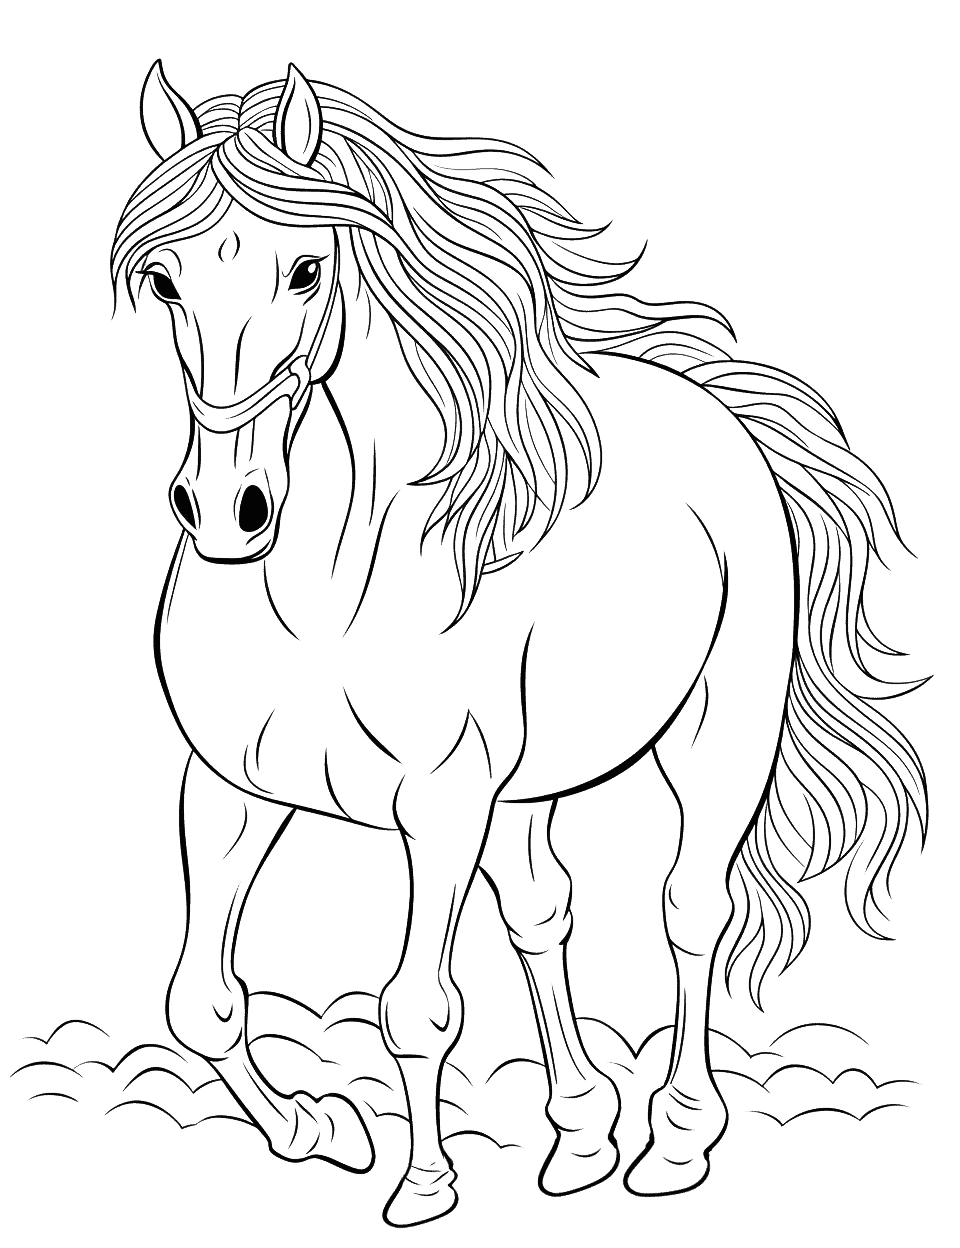 Detailed Stallion Portrait Coloring Page - A detailed portrait of a majestic stallion, great for older kids who want a challenge.